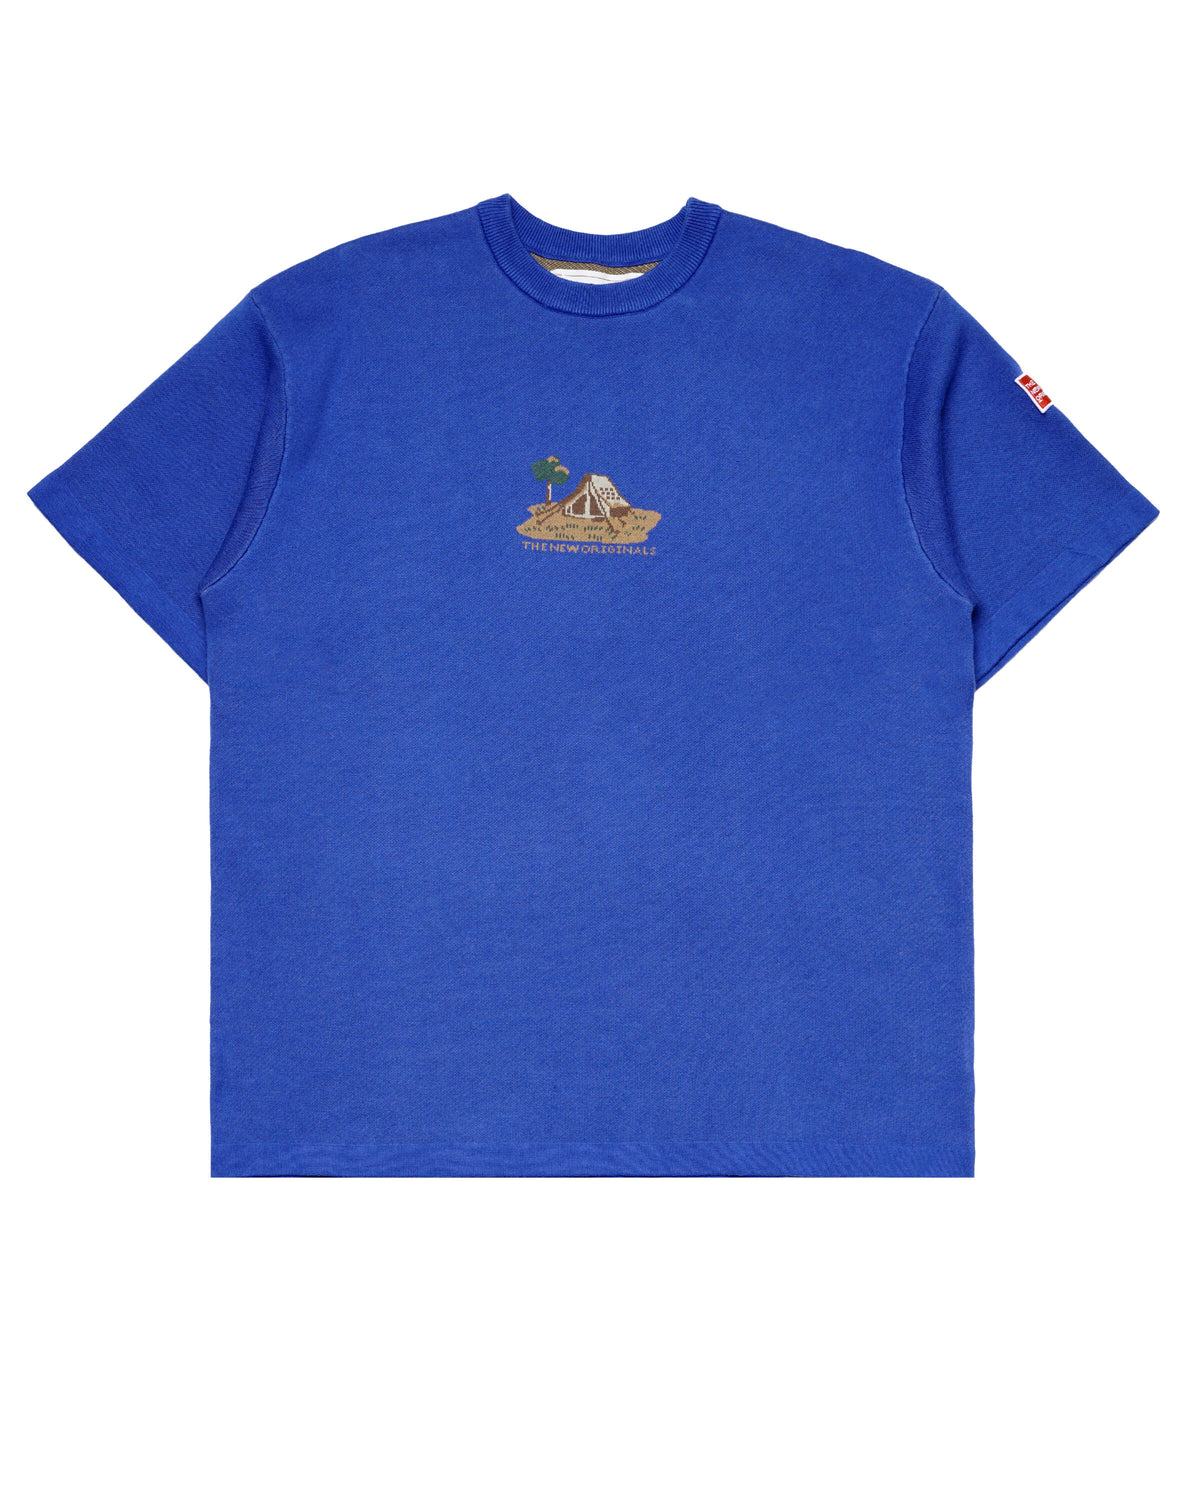 The New Originals Camping Landscape Knit Tee